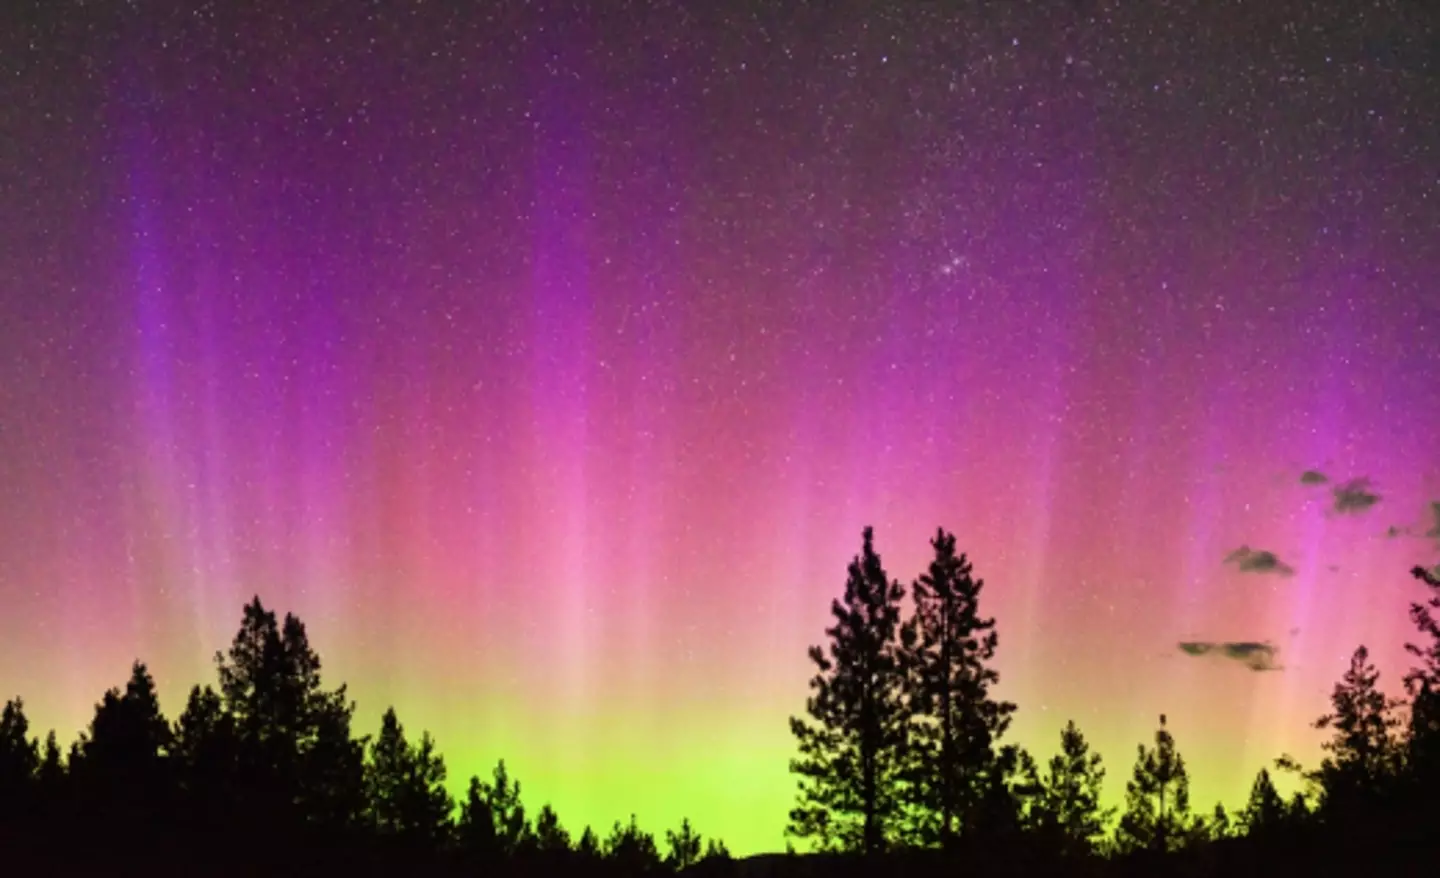 The G-1 geomagnetic storm caused auroras in a number of northern US states.